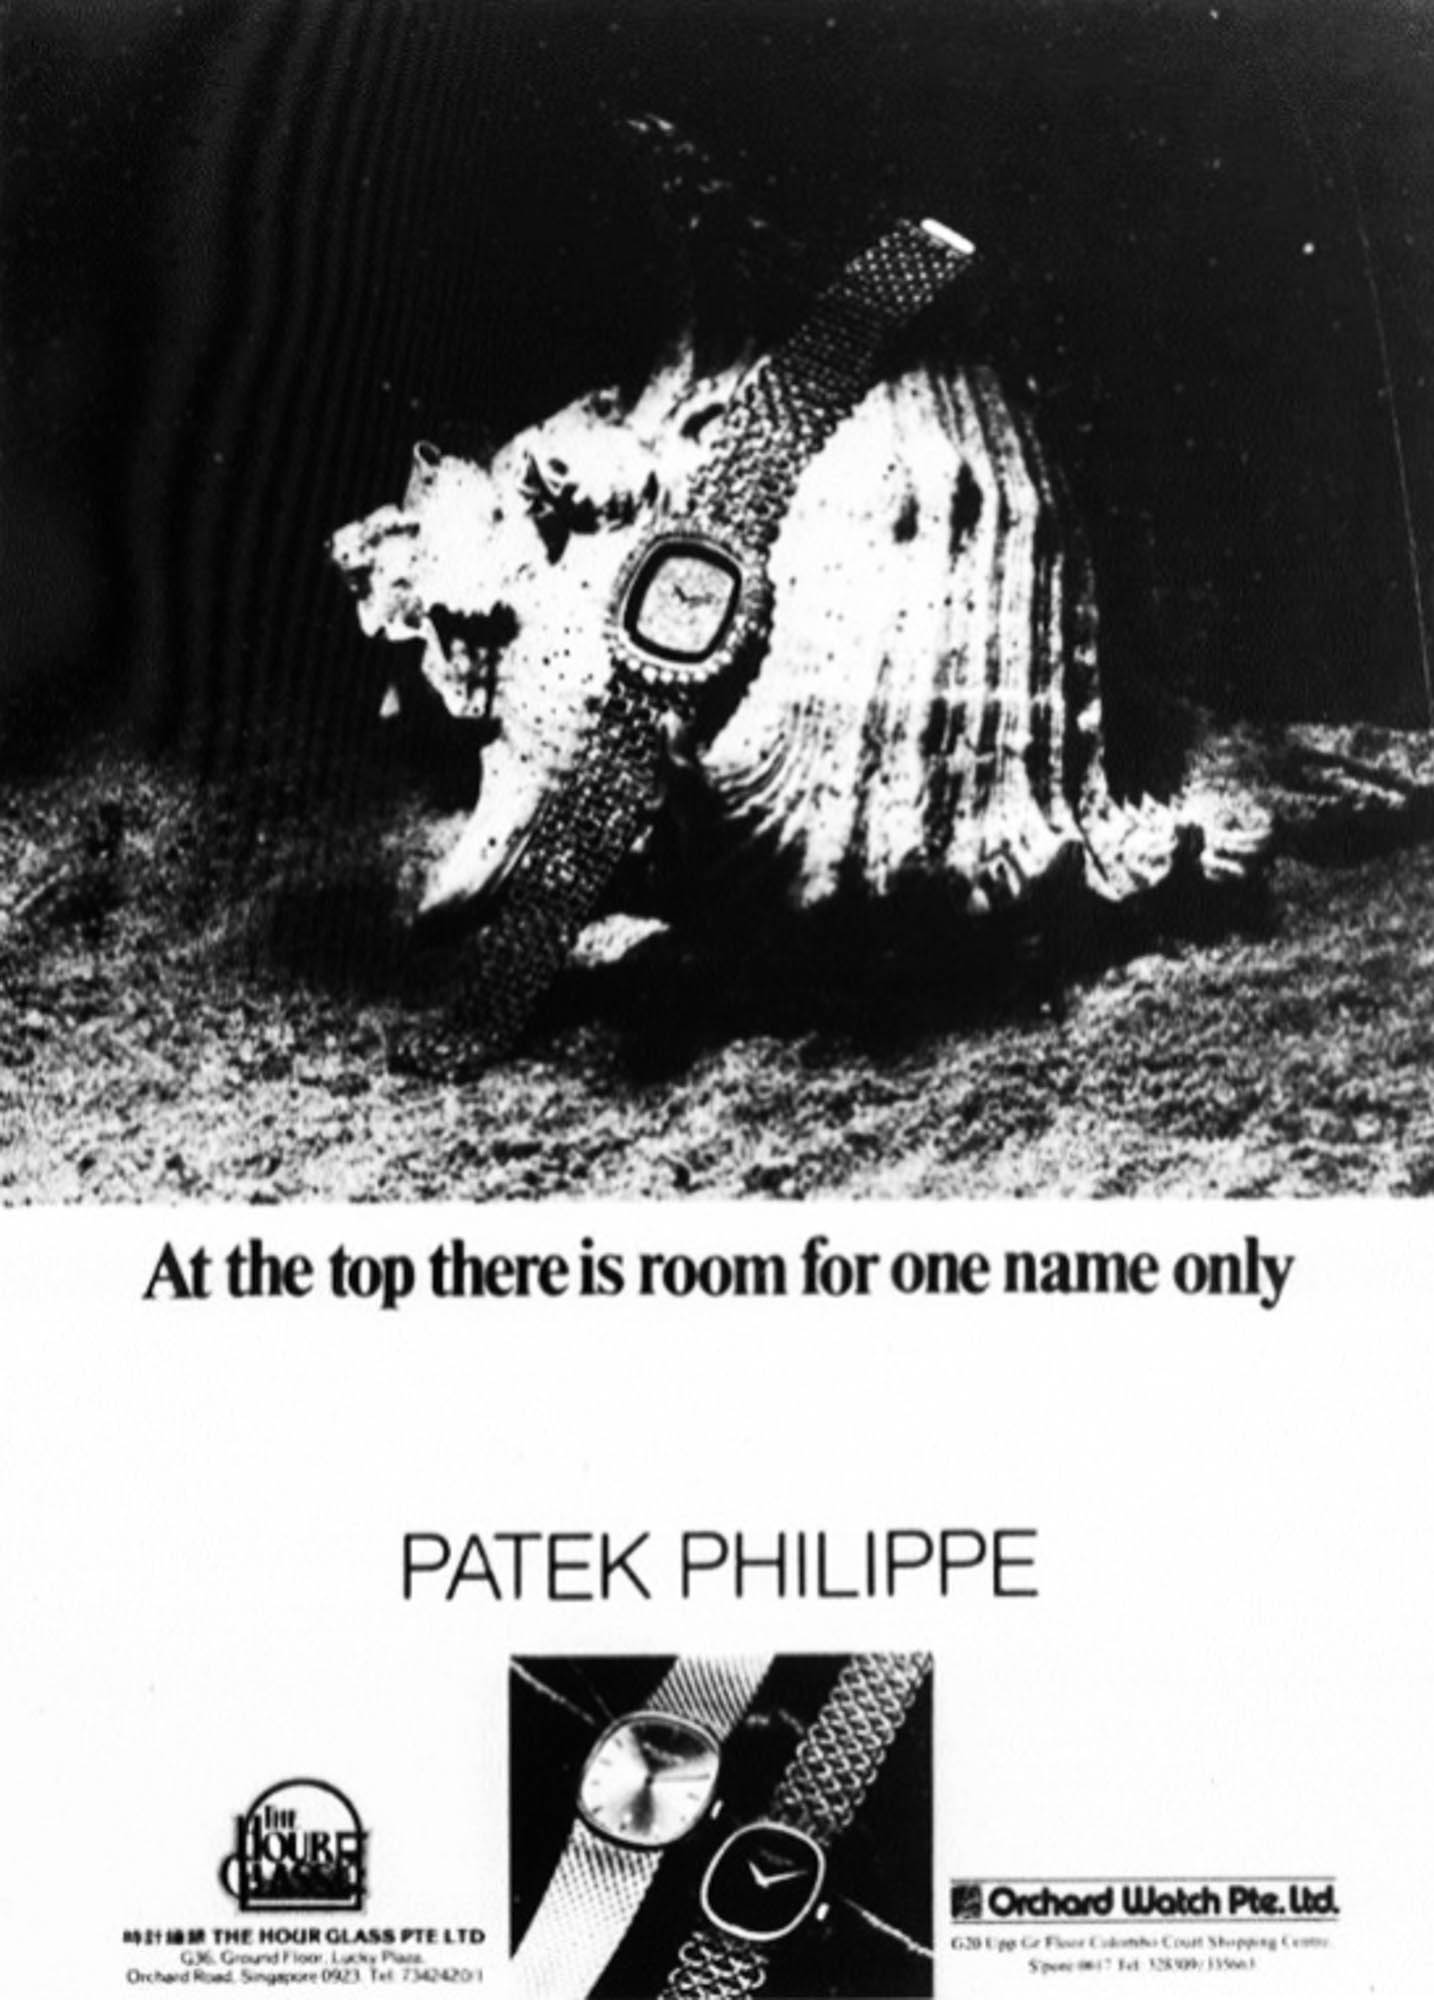 An advertising from The Hour Glass promoting Patek Philippe watches in 1979. For decades, Patek Philippe has been combining the finest of its watchmaking and gem-setting expertise into watches. Here a Golden Ellipse enhanced with diamonds.